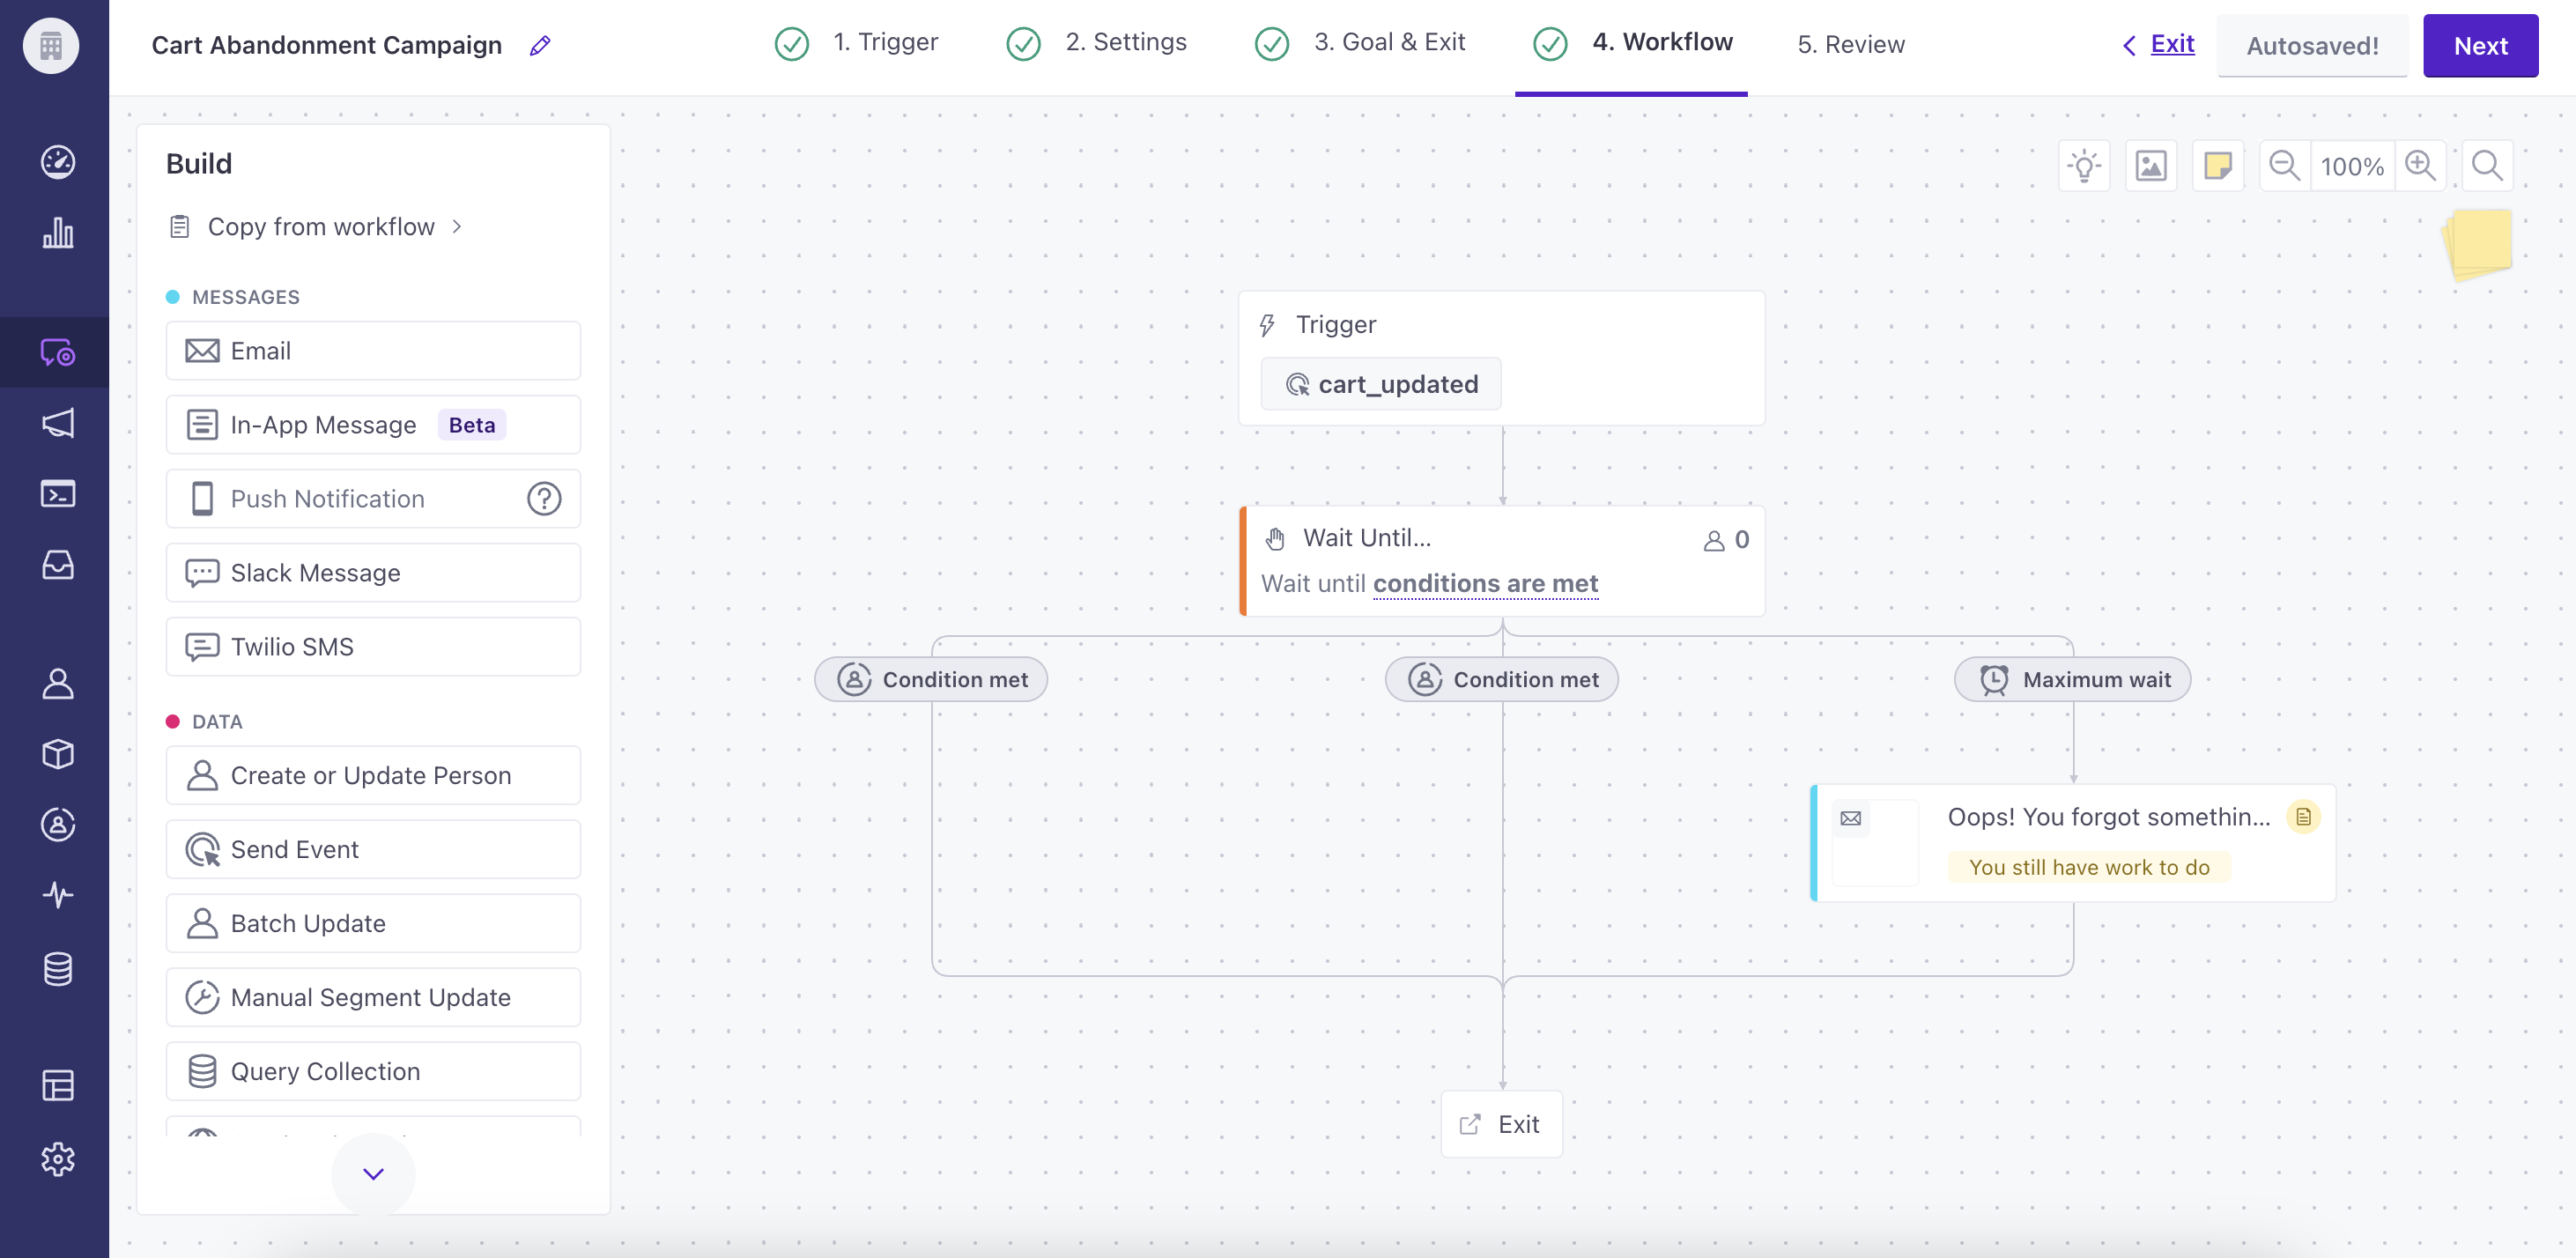 On the Workflow canvas, there is a Wait Until delay with three paths. There are two conditions and one path based on maximum time. Under maximum time is an email. The other conditions cause a person to exit.